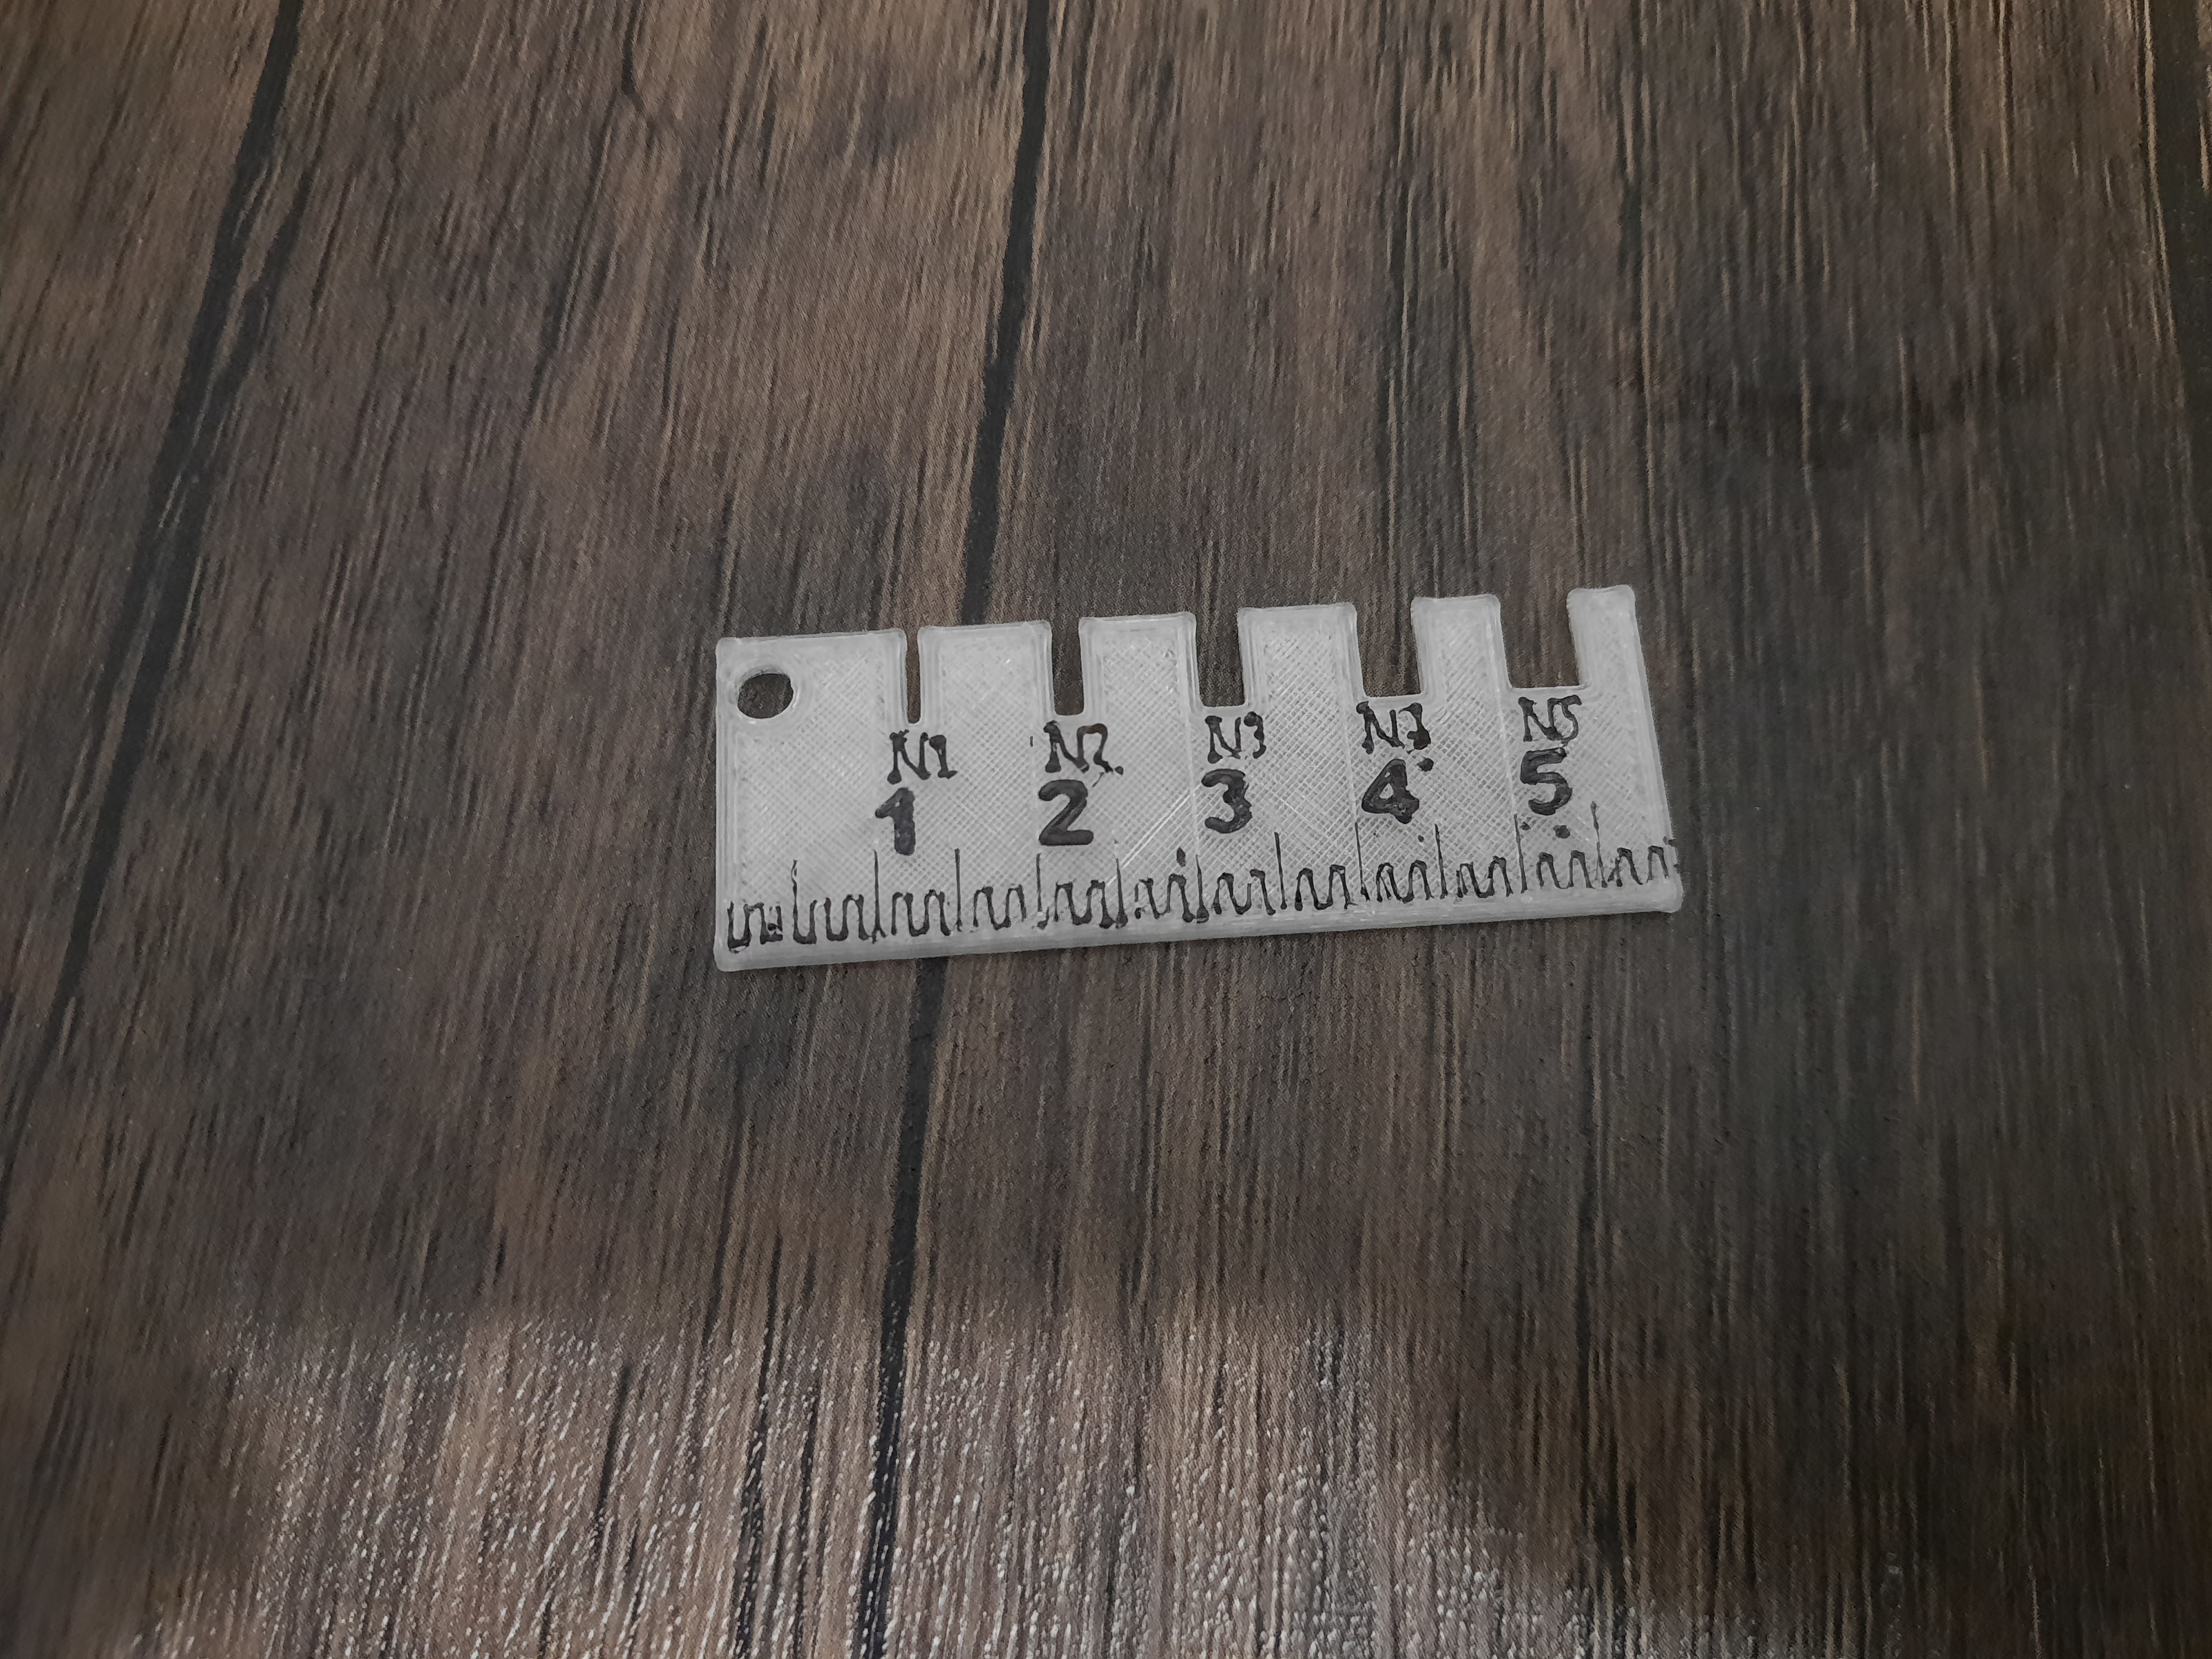 Keychain ruler and screw measuring